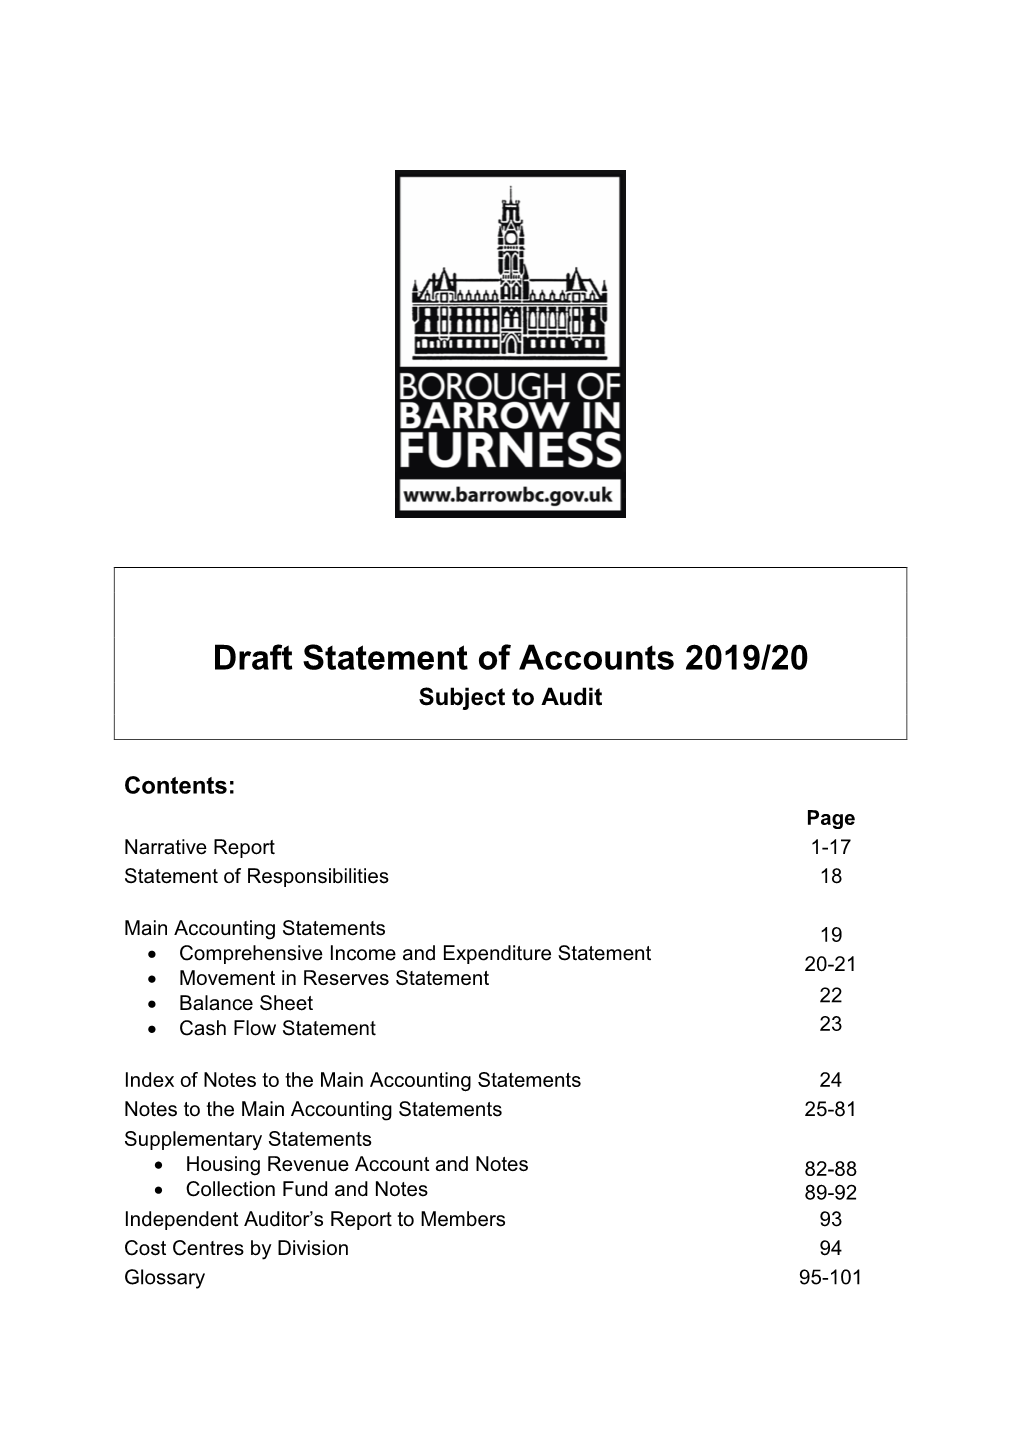 Draft Statement of Accounts 2019/20 Subject to Audit